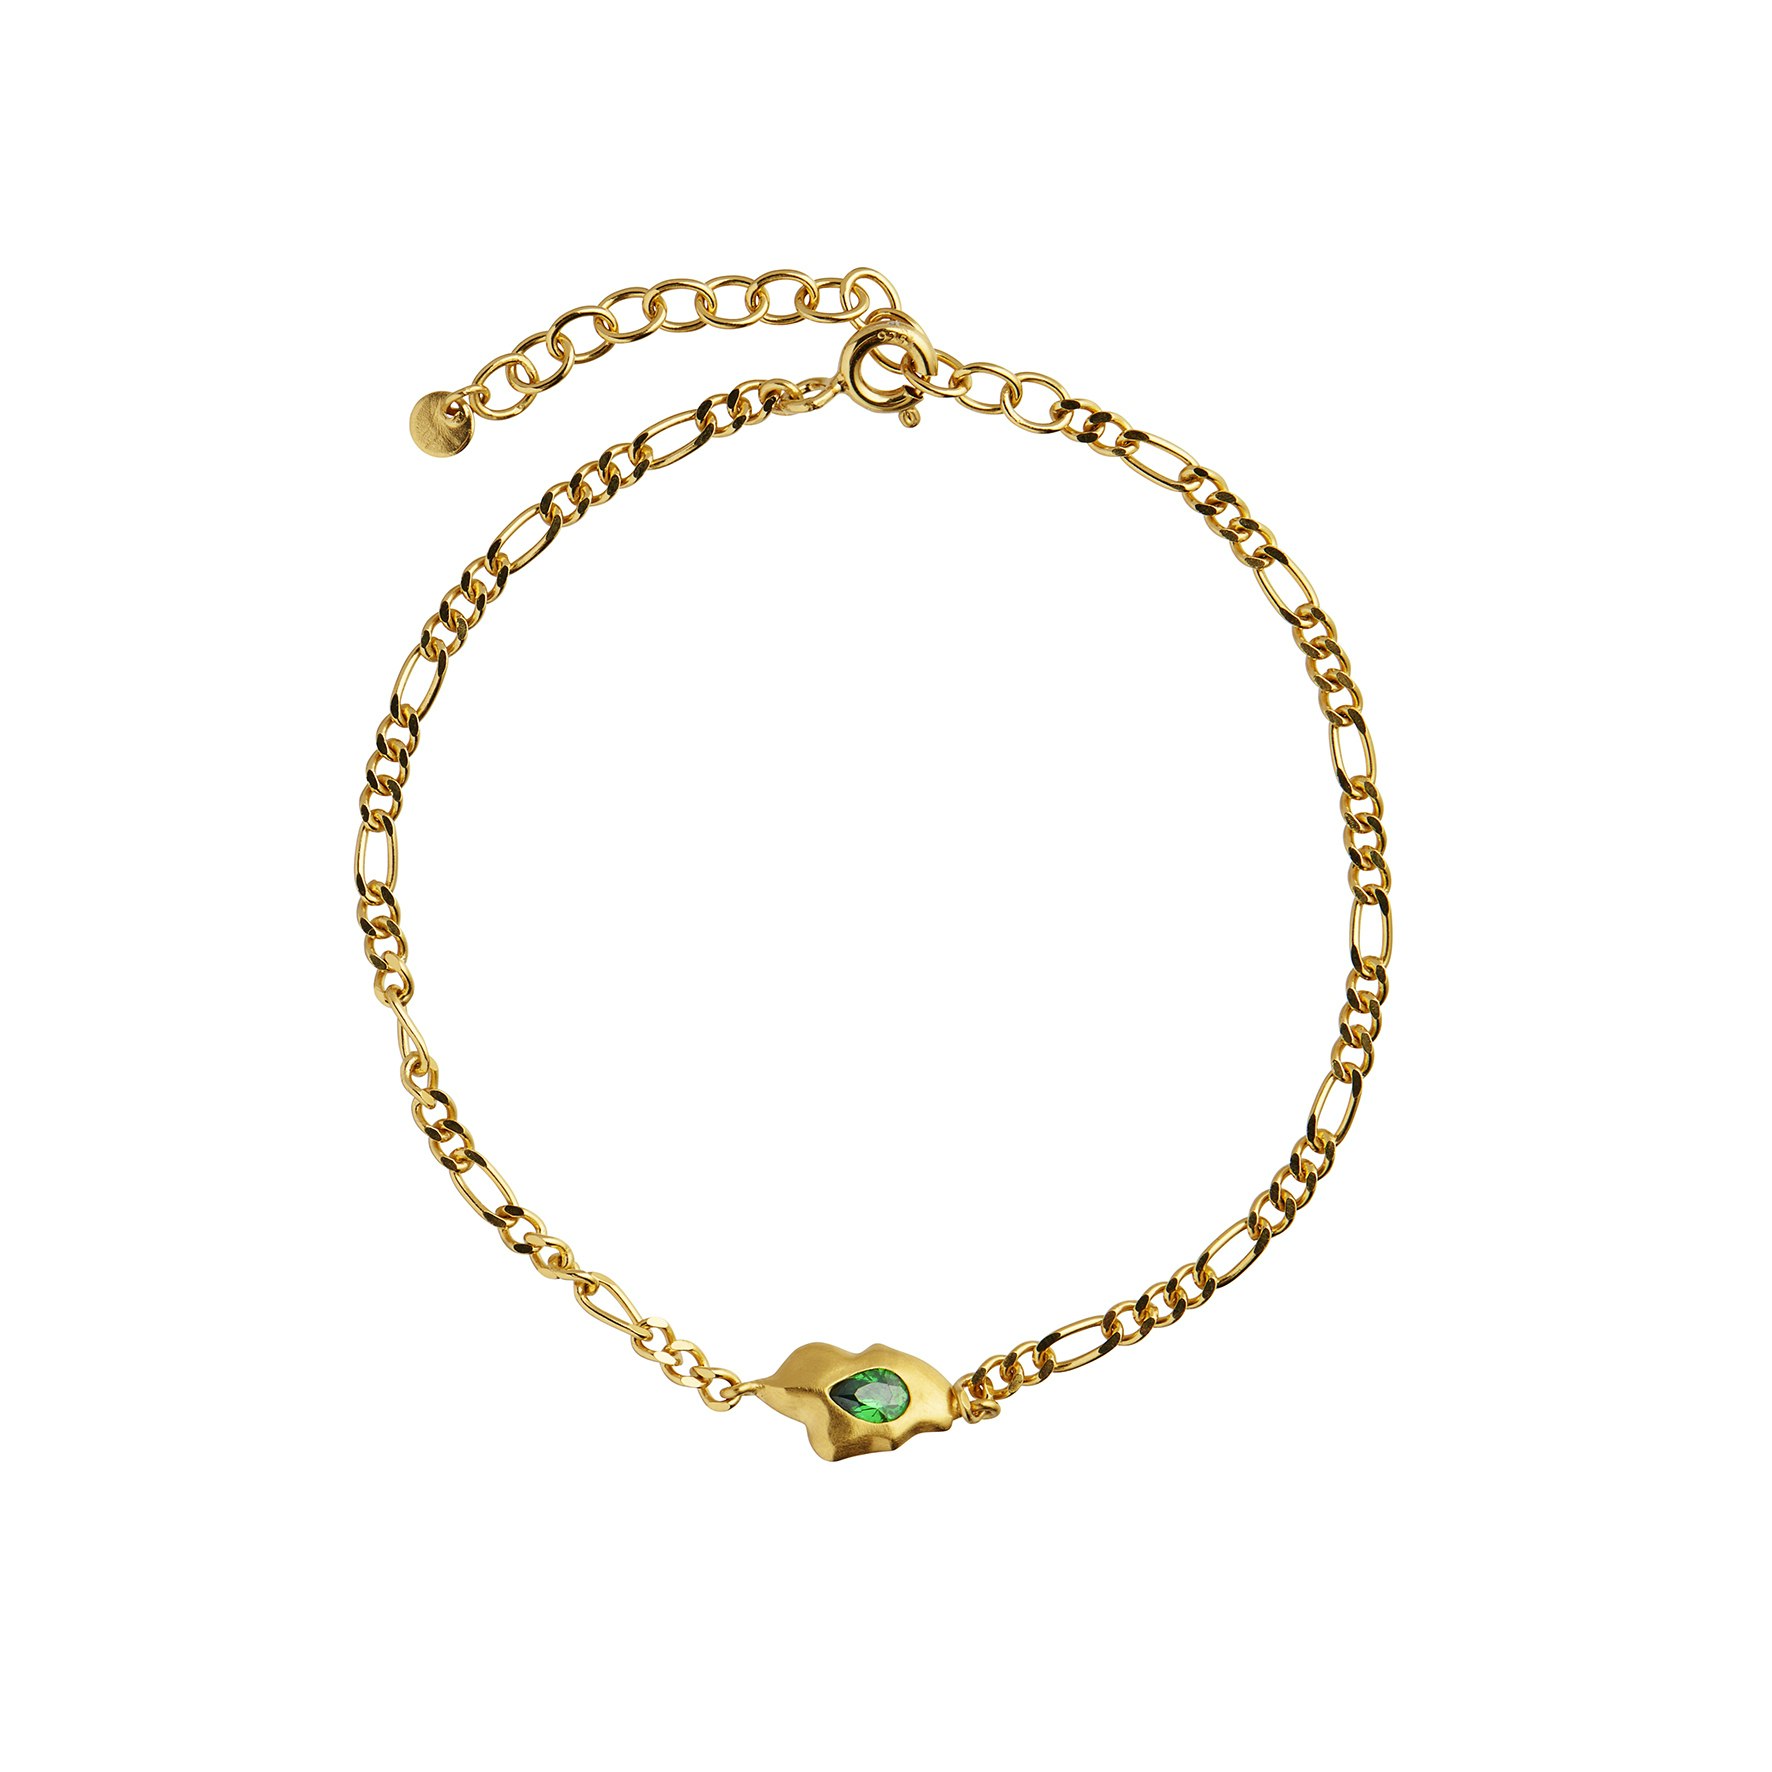 Glimpse Figaro Bracelet With Green Stone from STINE A Jewelry in Goldplated-Silver Sterling 925